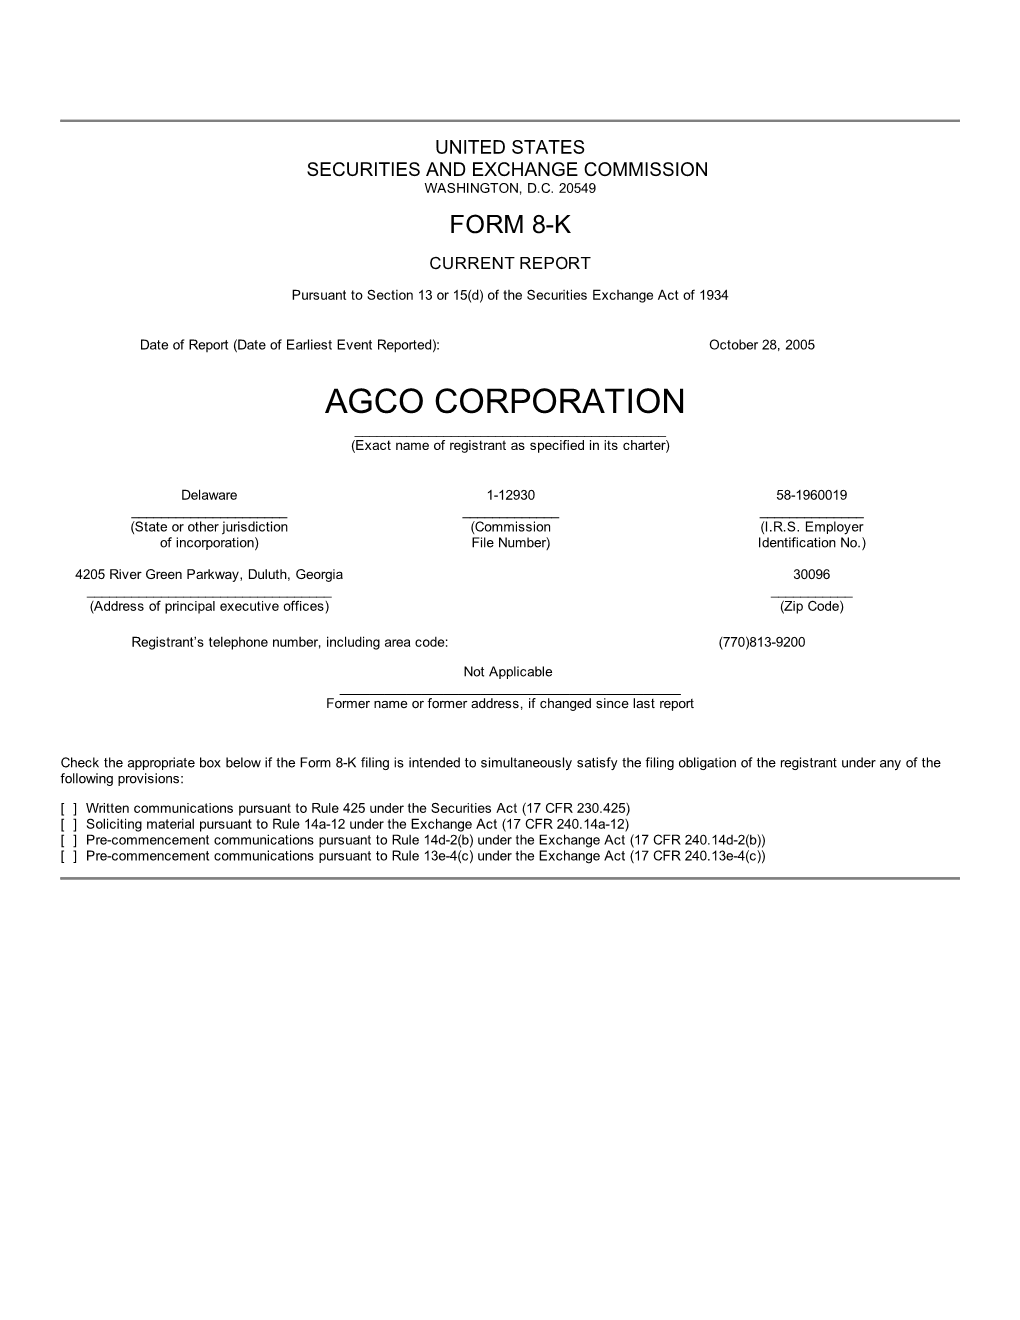 AGCO CORPORATION ______(Exact Name of Registrant As Specified in Its Charter)